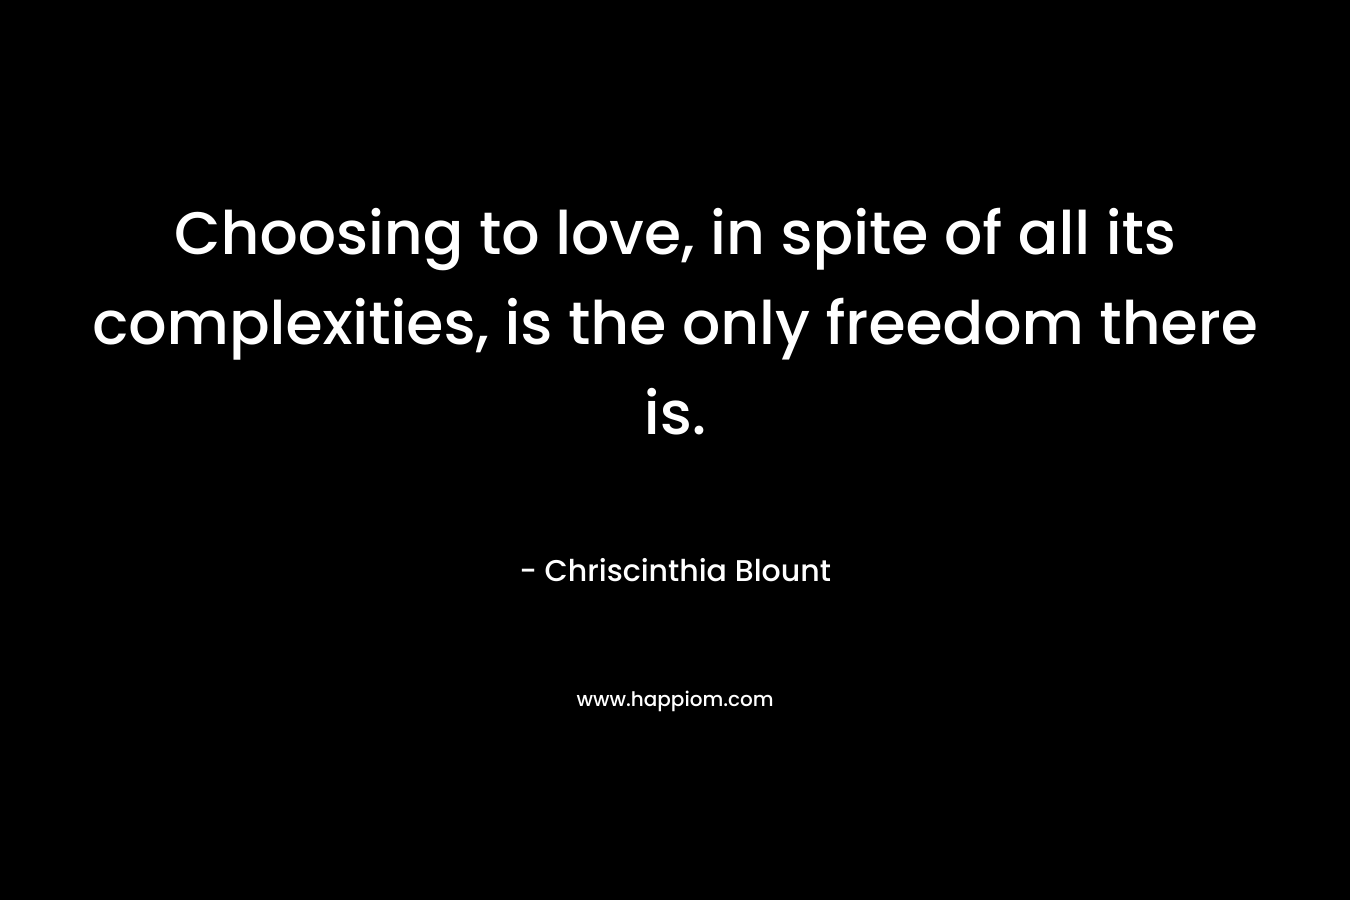 Choosing to love, in spite of all its complexities, is the only freedom there is. – Chriscinthia Blount